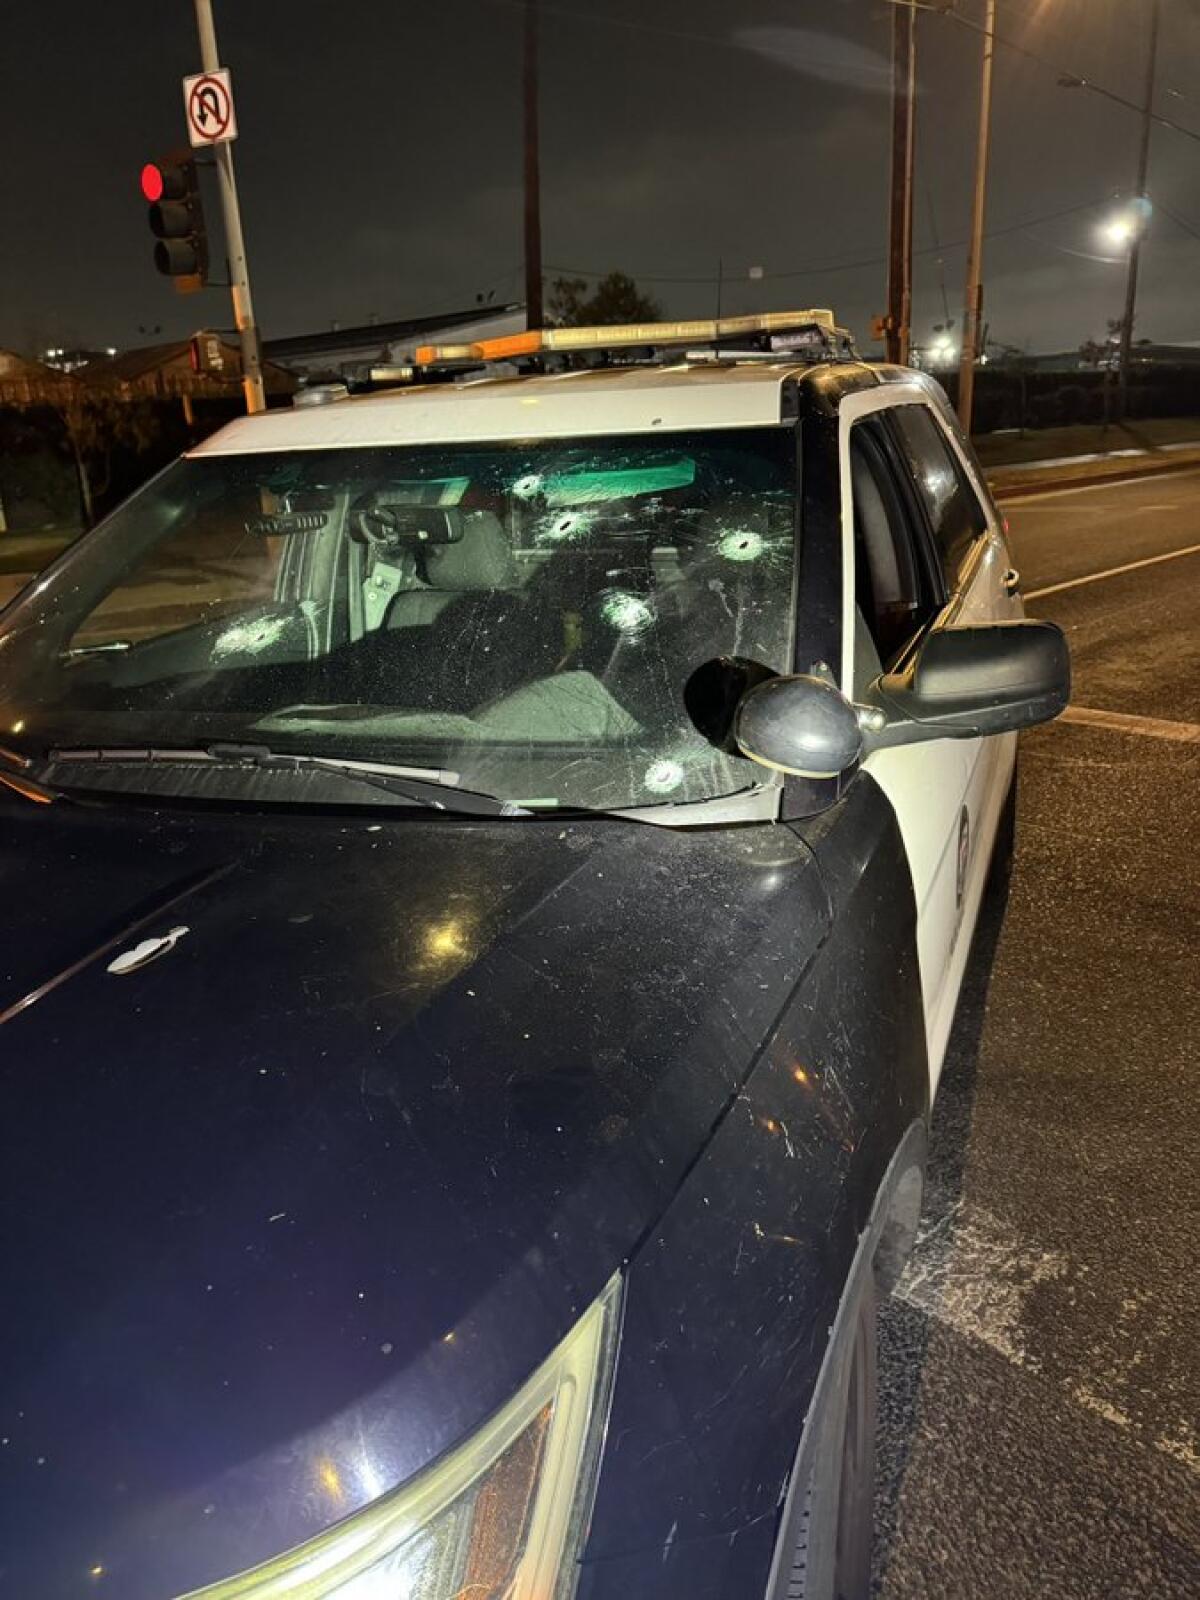 A stationary police cruiser on a street in the dark, its windshield riddled with bullet holes